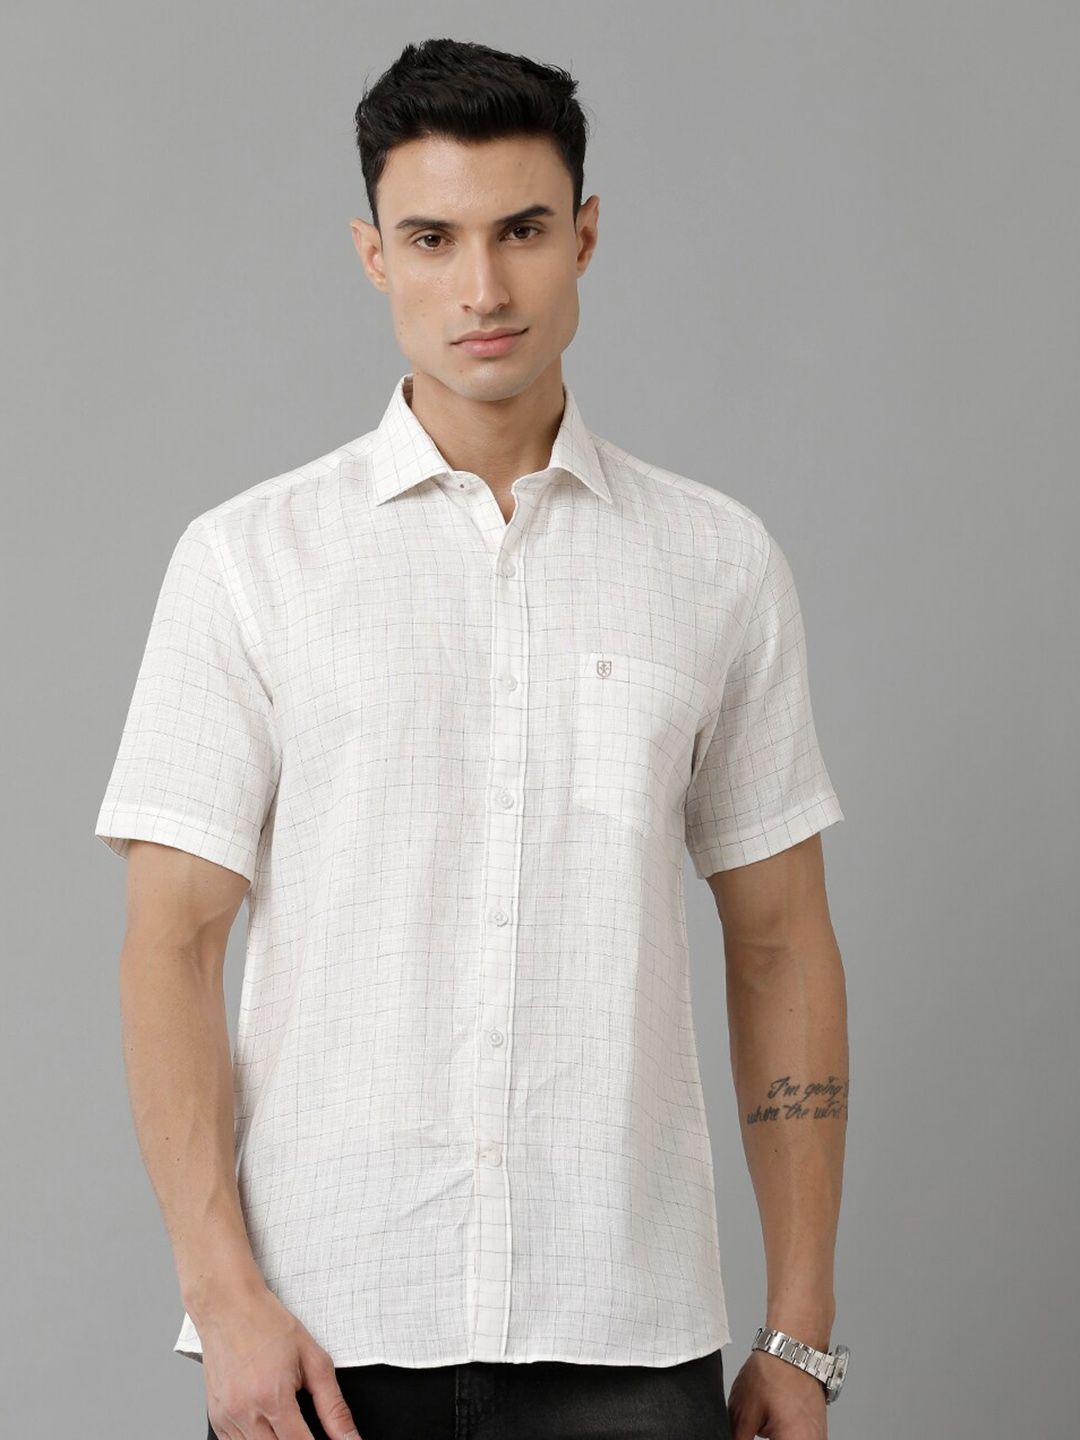 linen club checked short sleeves pure linen casual shirt